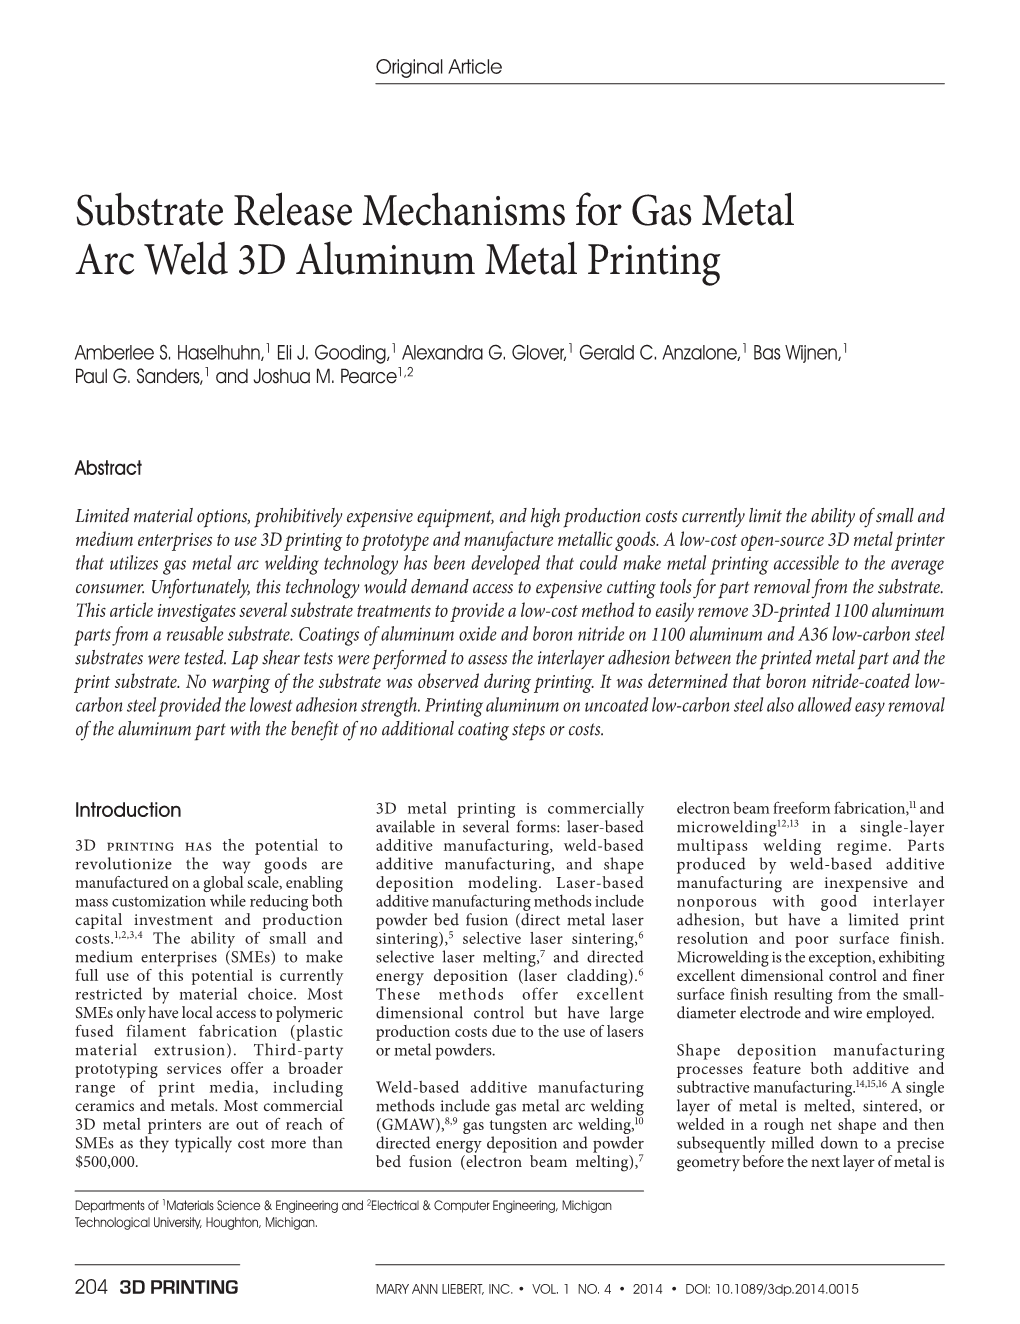 Substrate Release Mechanisms for Gas Metal Arc Weld 3D Aluminum Metal Printing